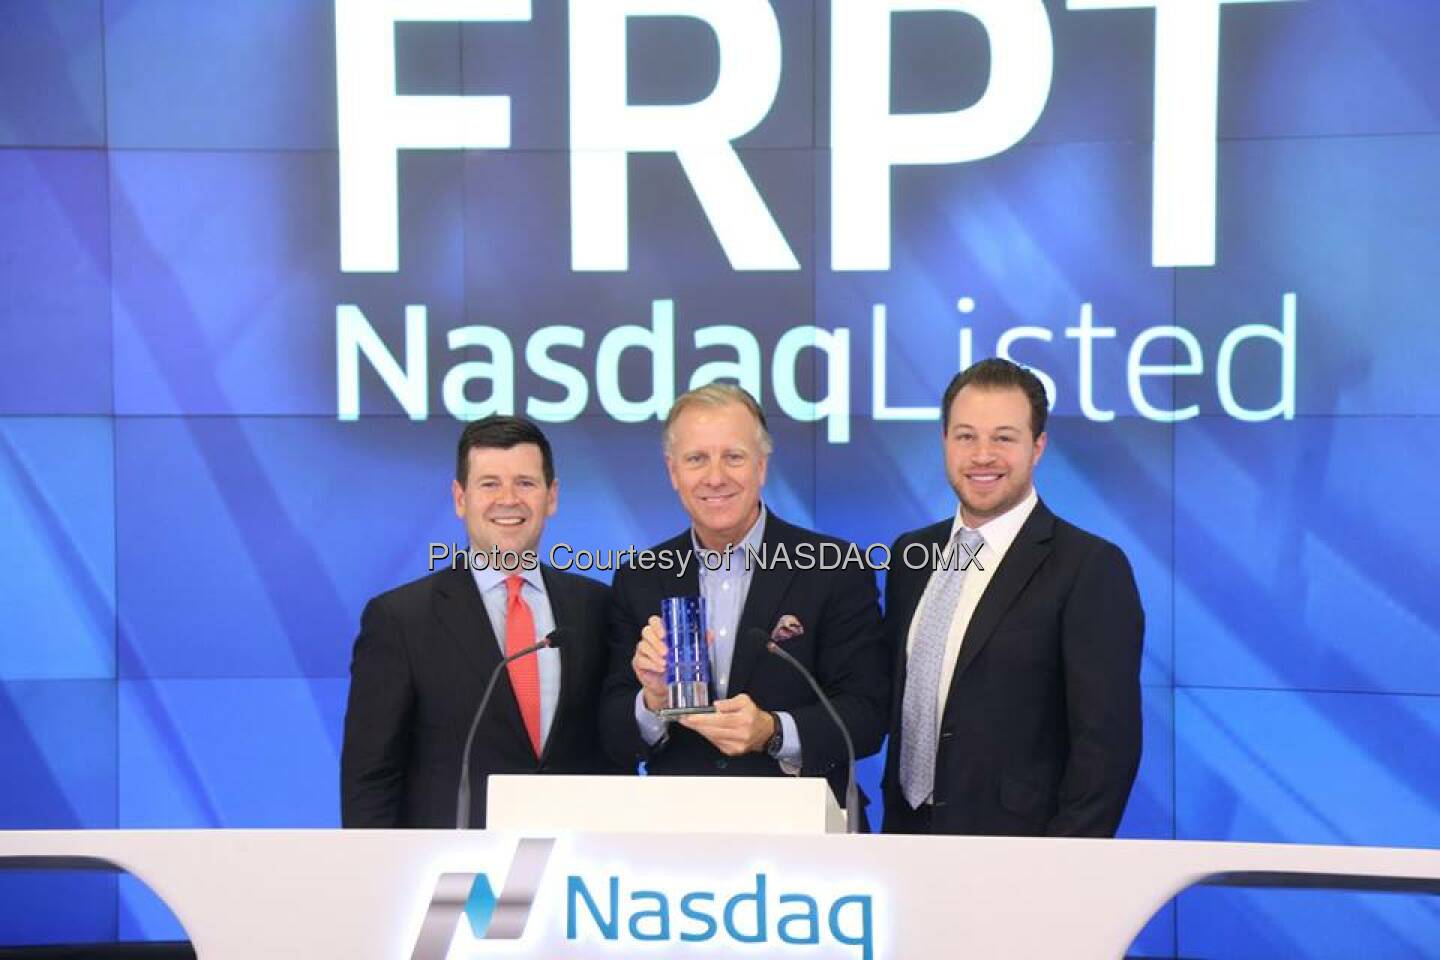 Nasdaq is proud to welcome Freshpet to the Nasdaq Family! Congratulations on your IPO today $FRPT  Source: http://facebook.com/NASDAQ